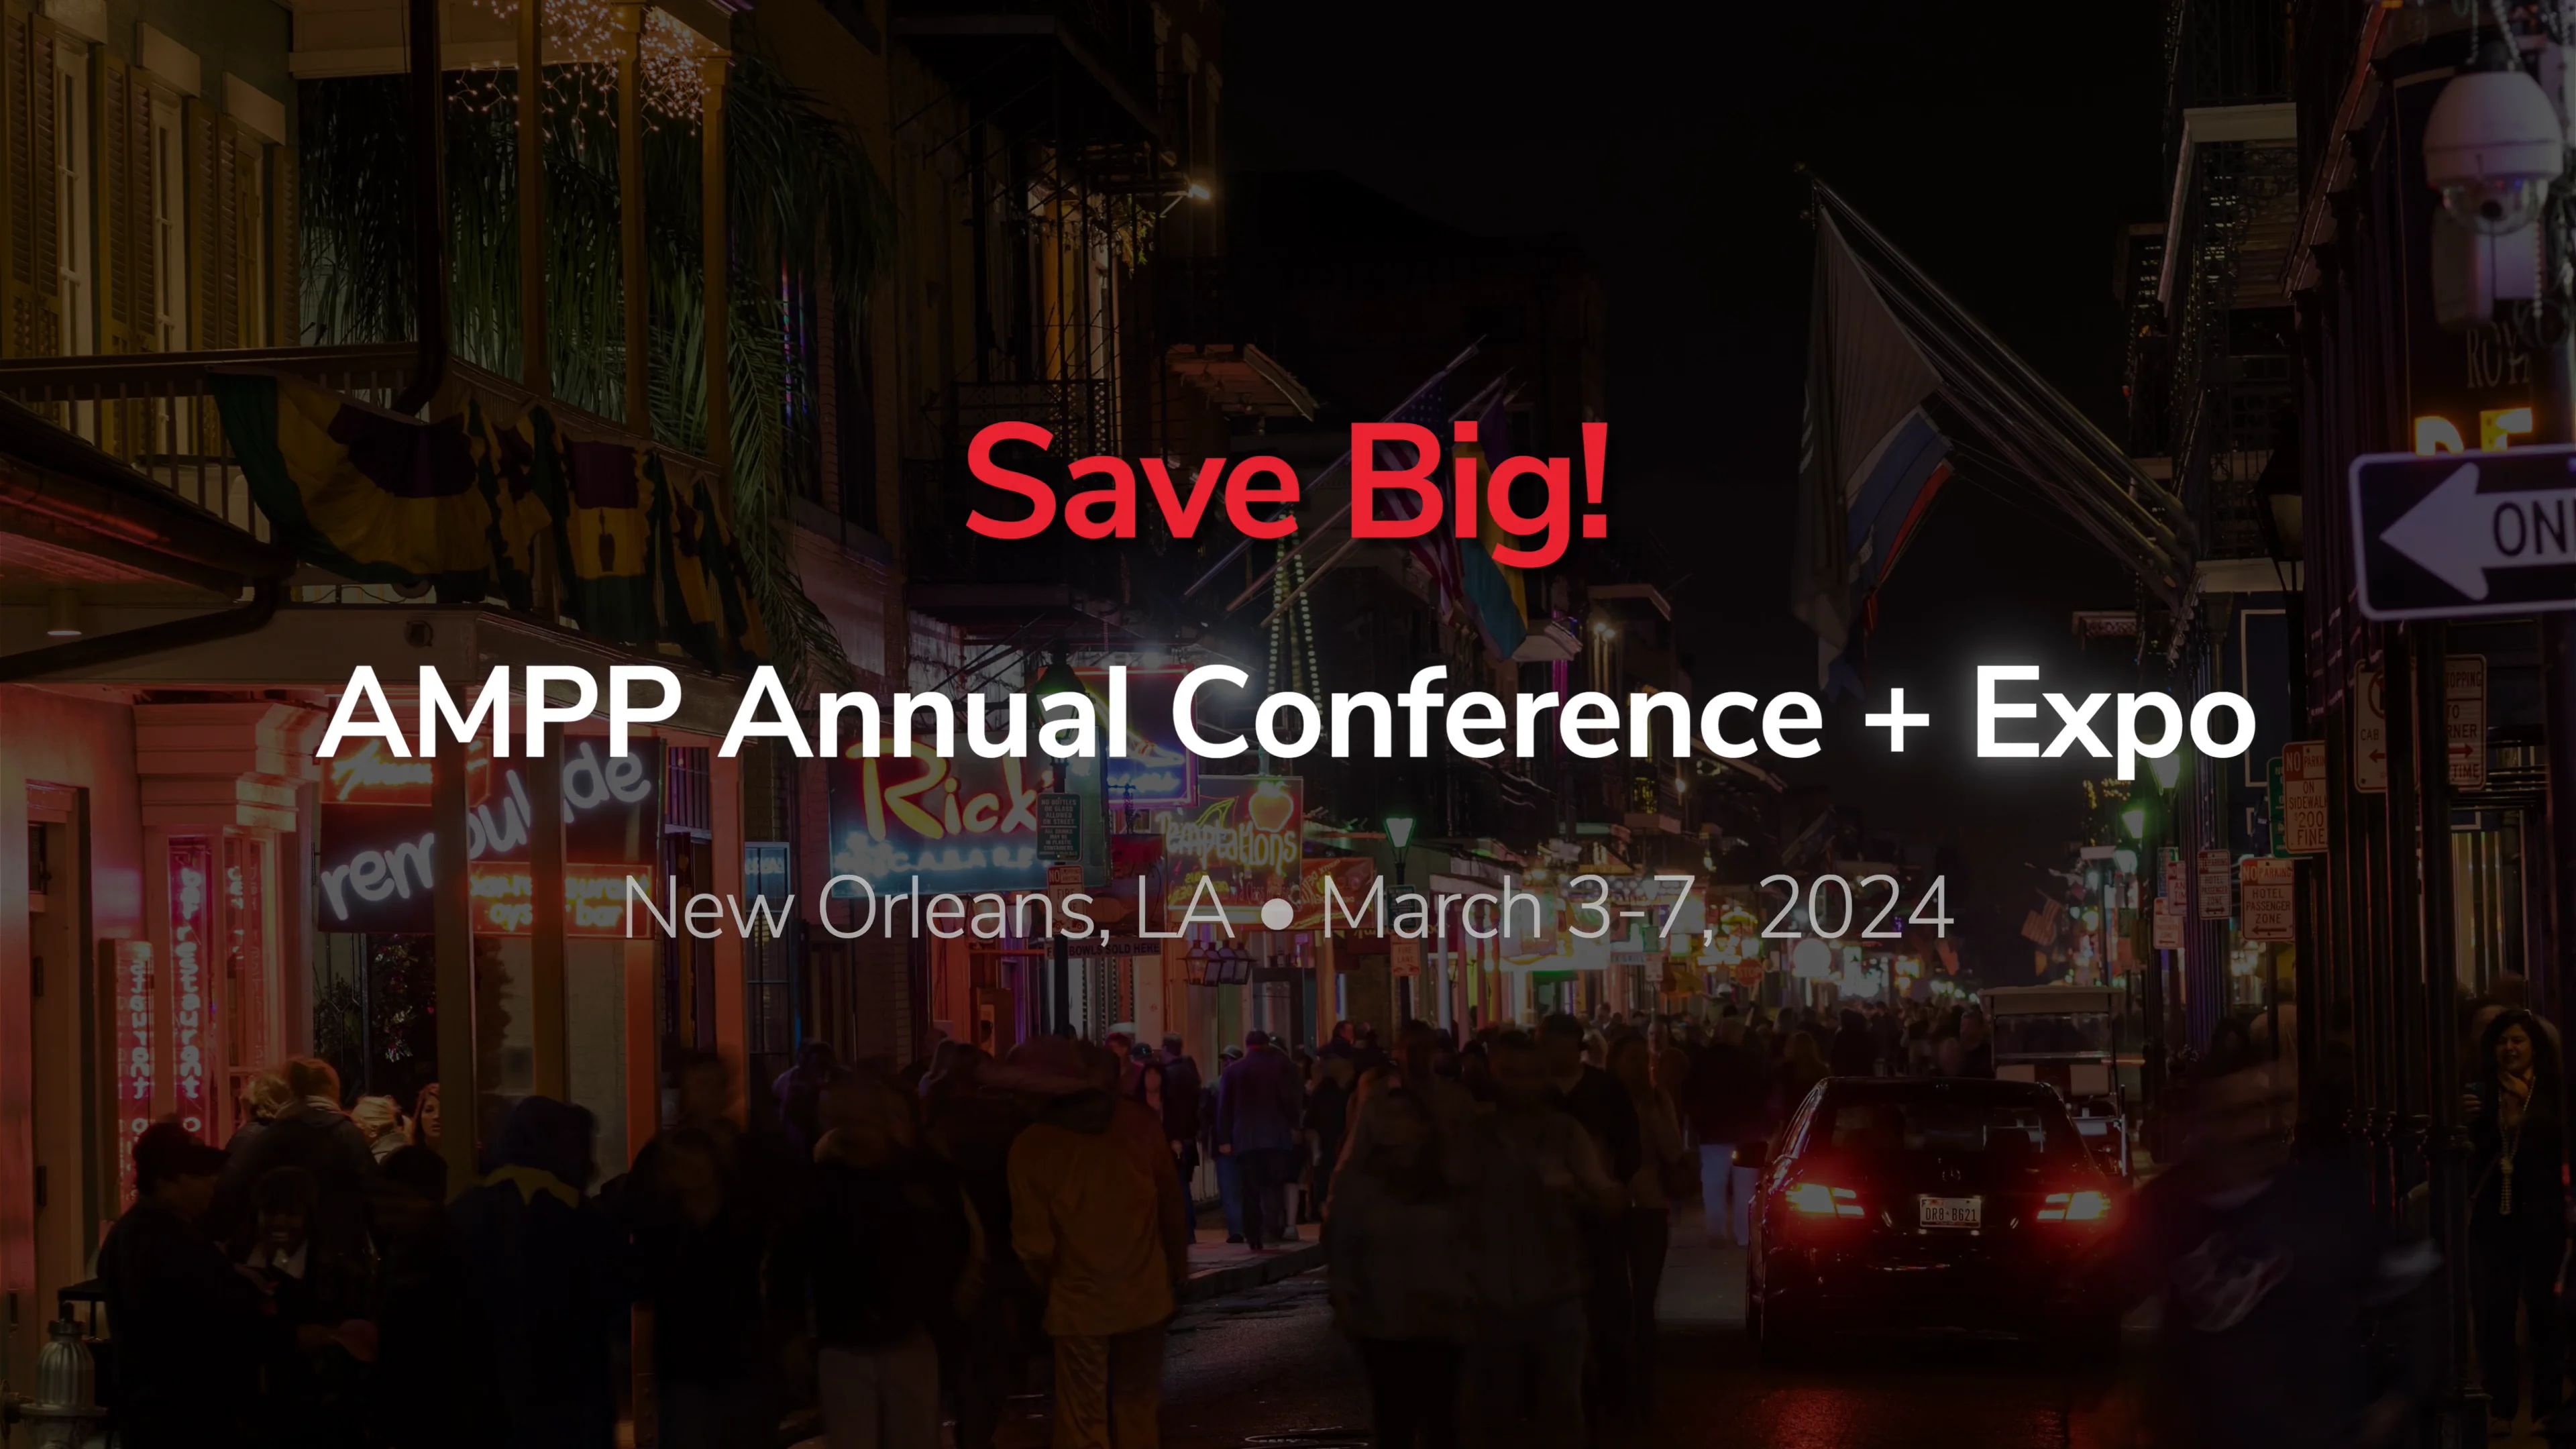 AMPP Annual Conference + Expo 2024 Advance Registration on Vimeo